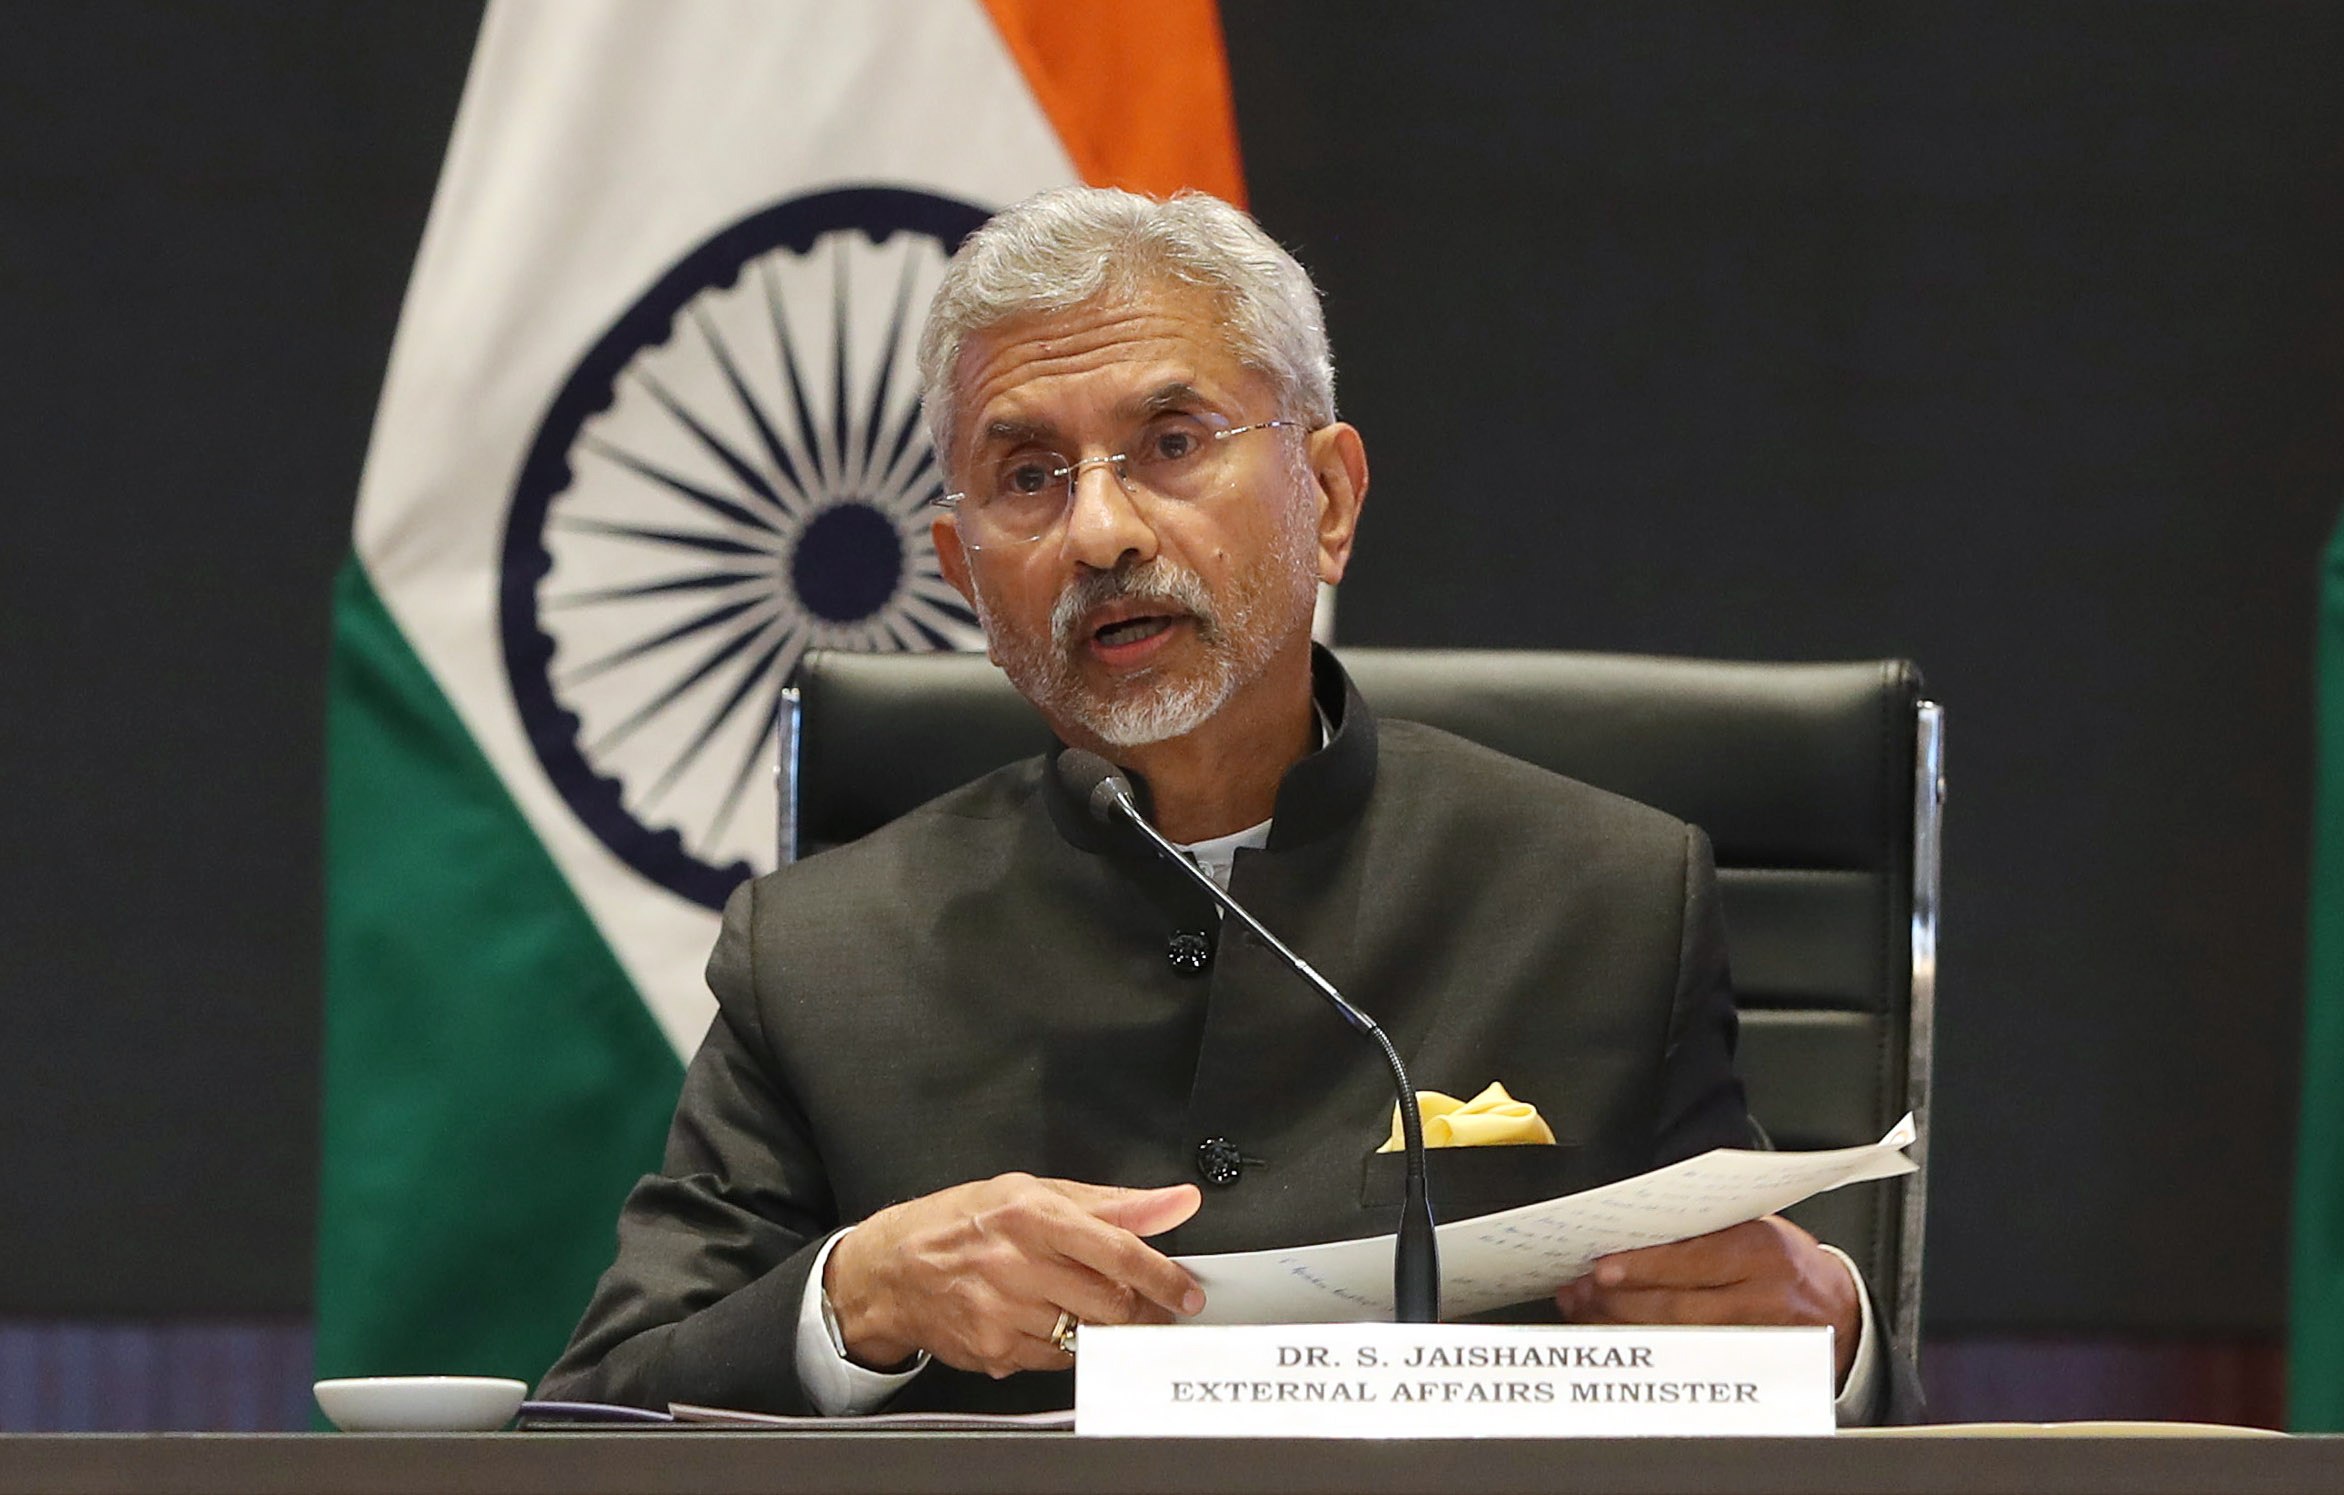 Indian Foreign Minister S. Jaishankar speaks at a press conference in New Delhi in March 2023. India has demanded an end to further recruitment of its nationals by the Russian army. Photo: EPA-EFE